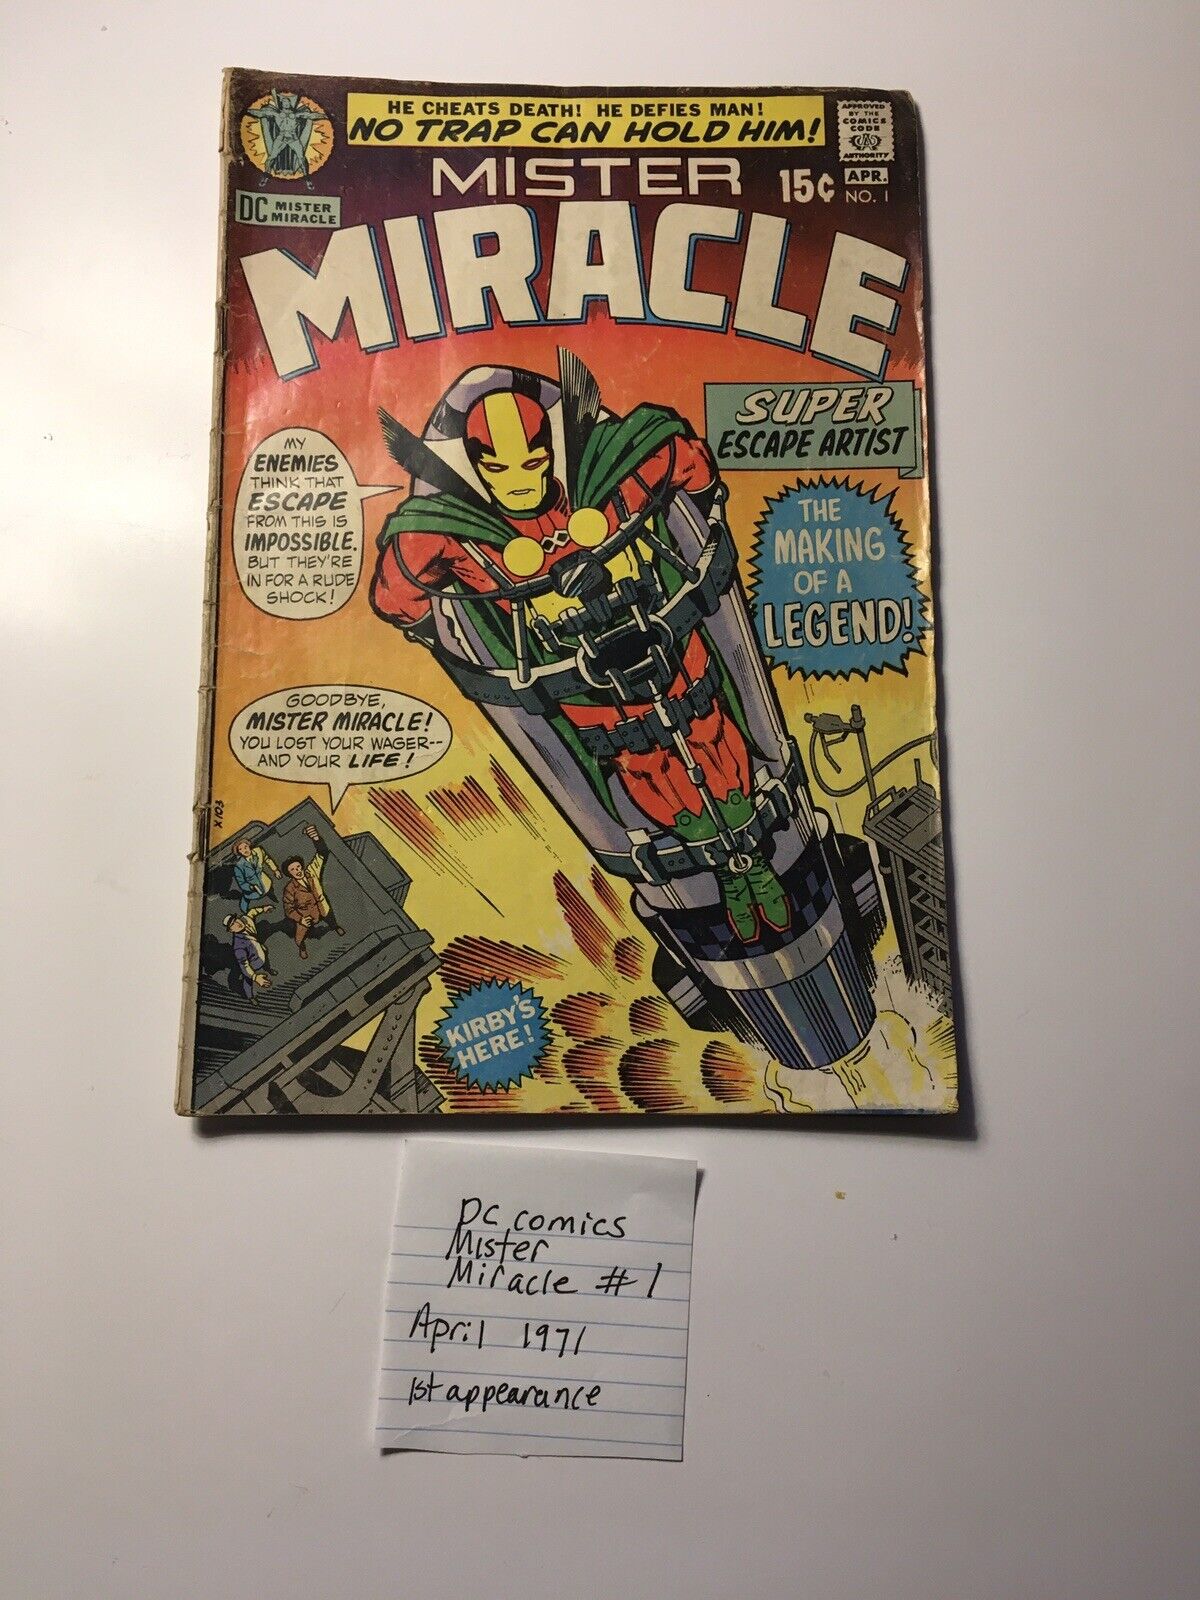 DC: MISTER MIRACLE #1, 1ST APP/OBERON/THADDEUS BROWN & DEATH OF, 1971, VG (4.0)